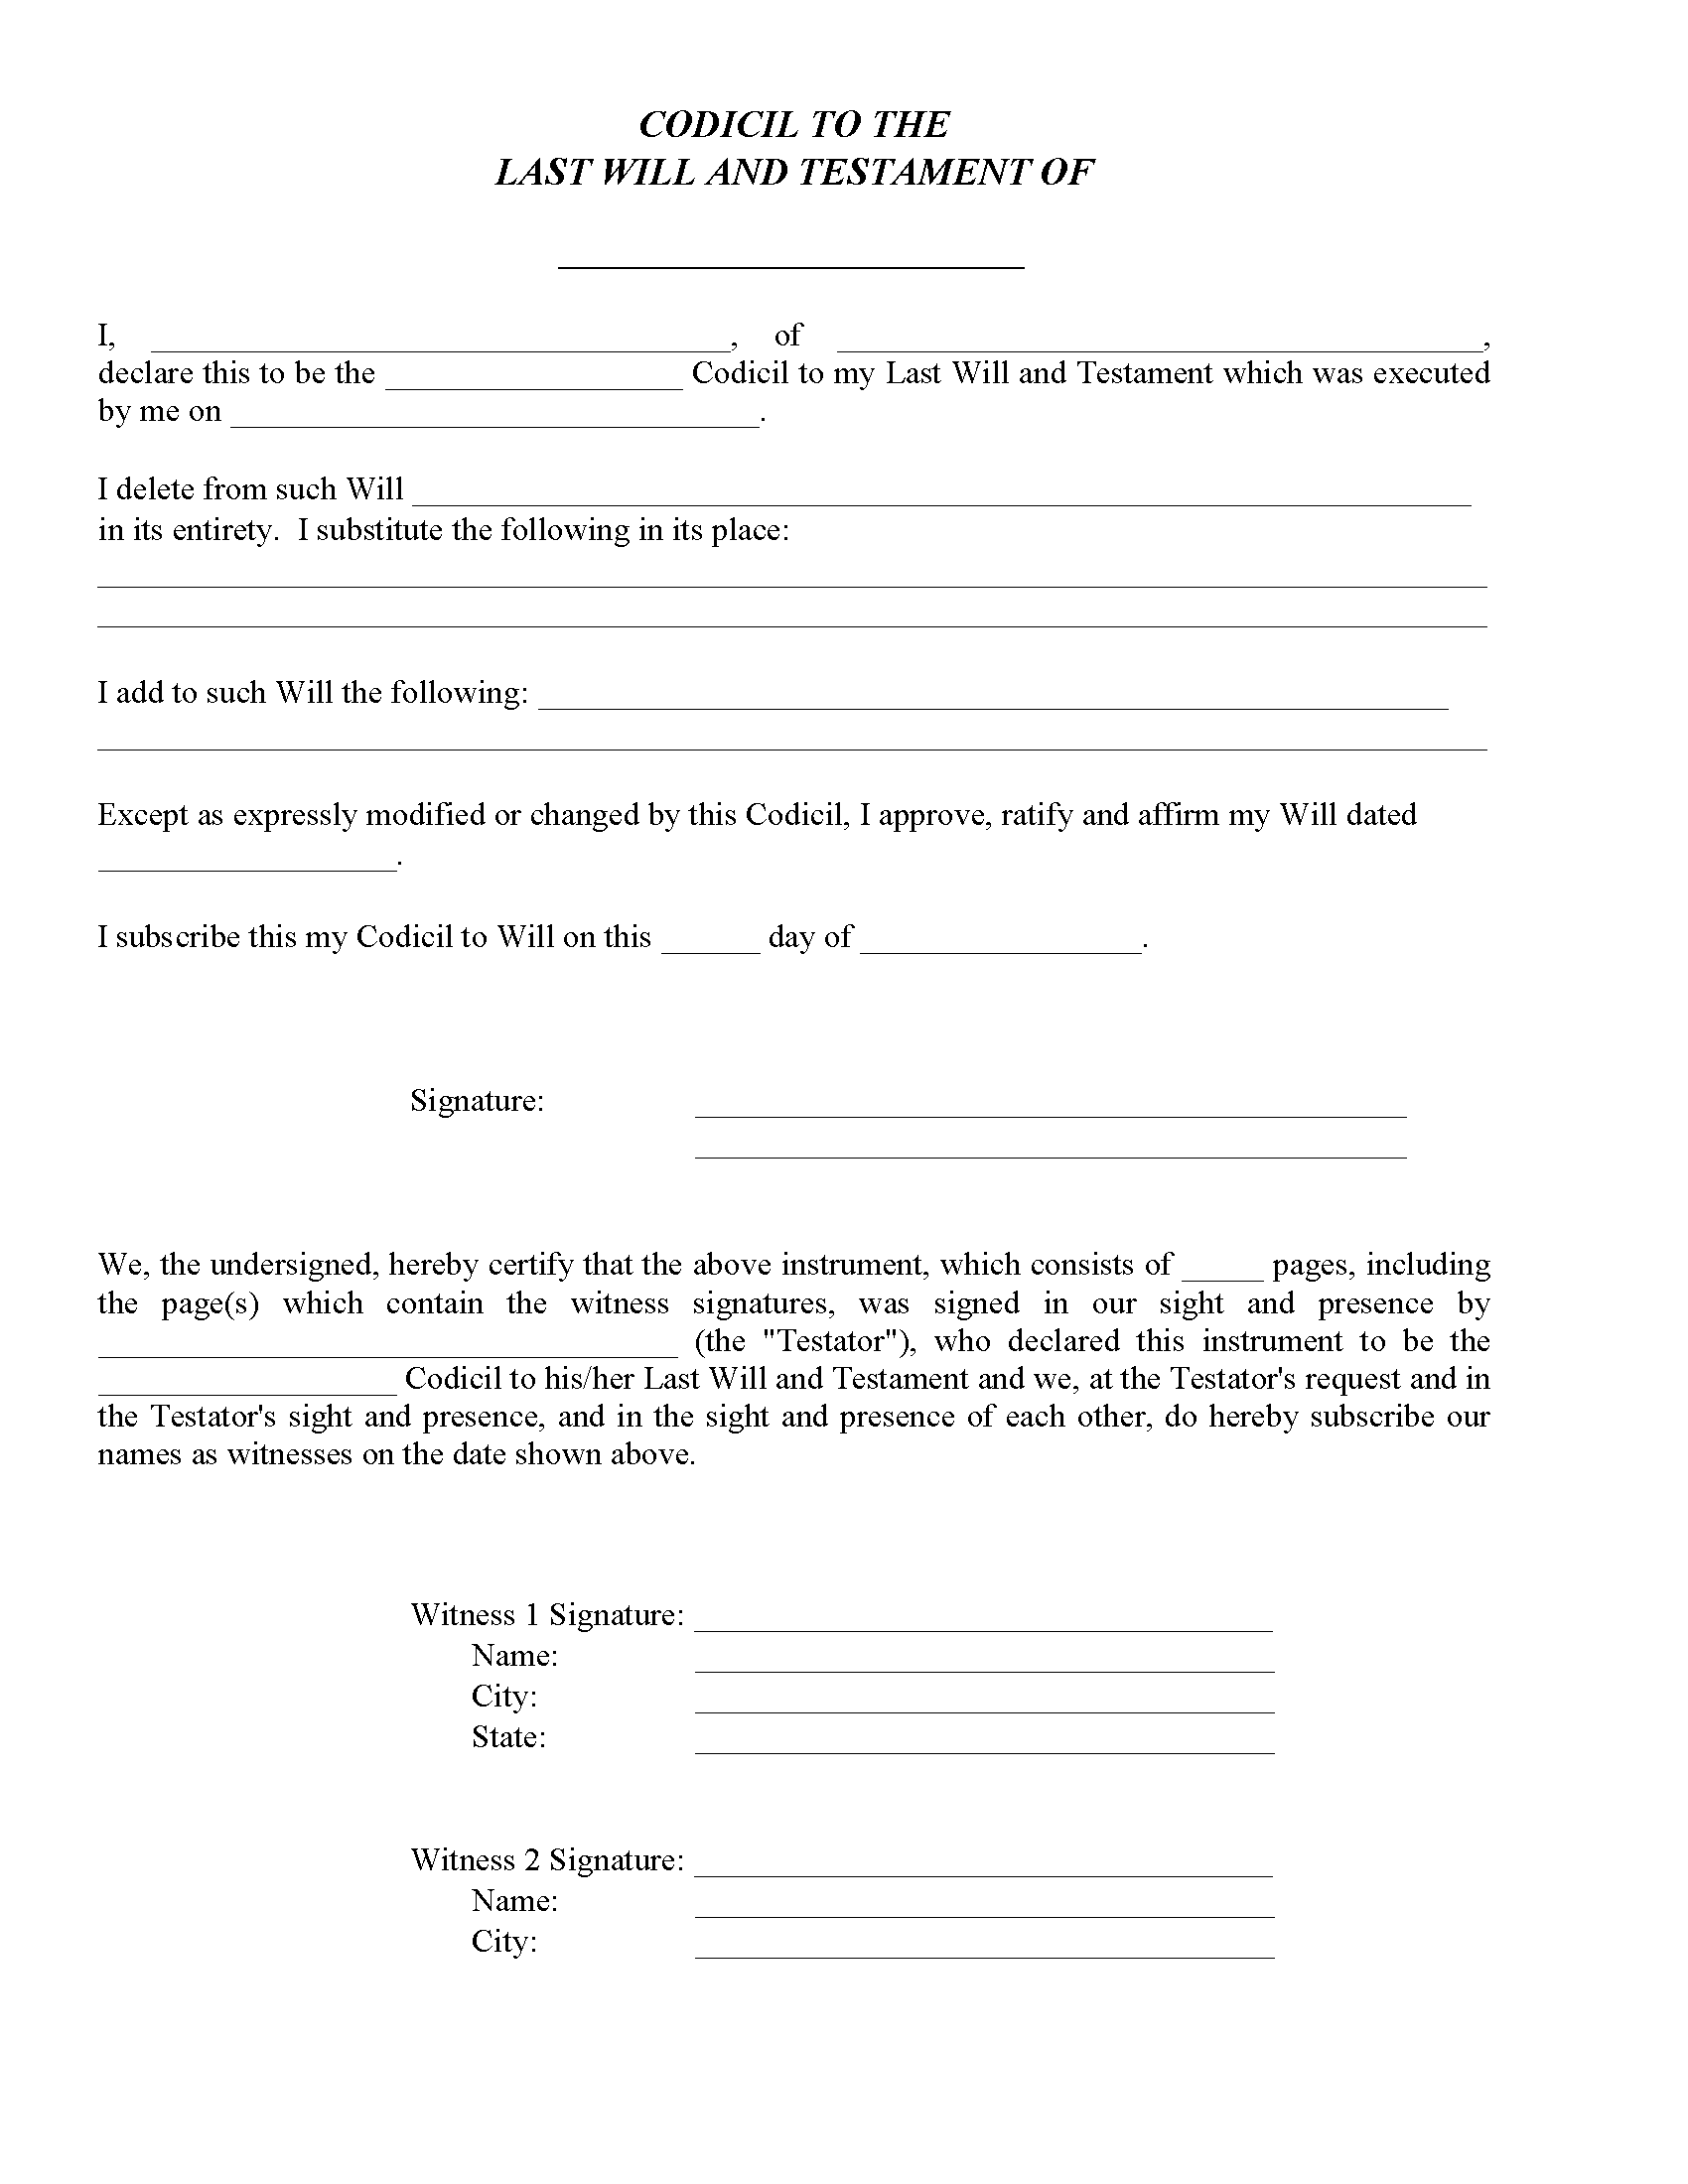 oregon-codicil-to-will-form-free-printable-legal-forms